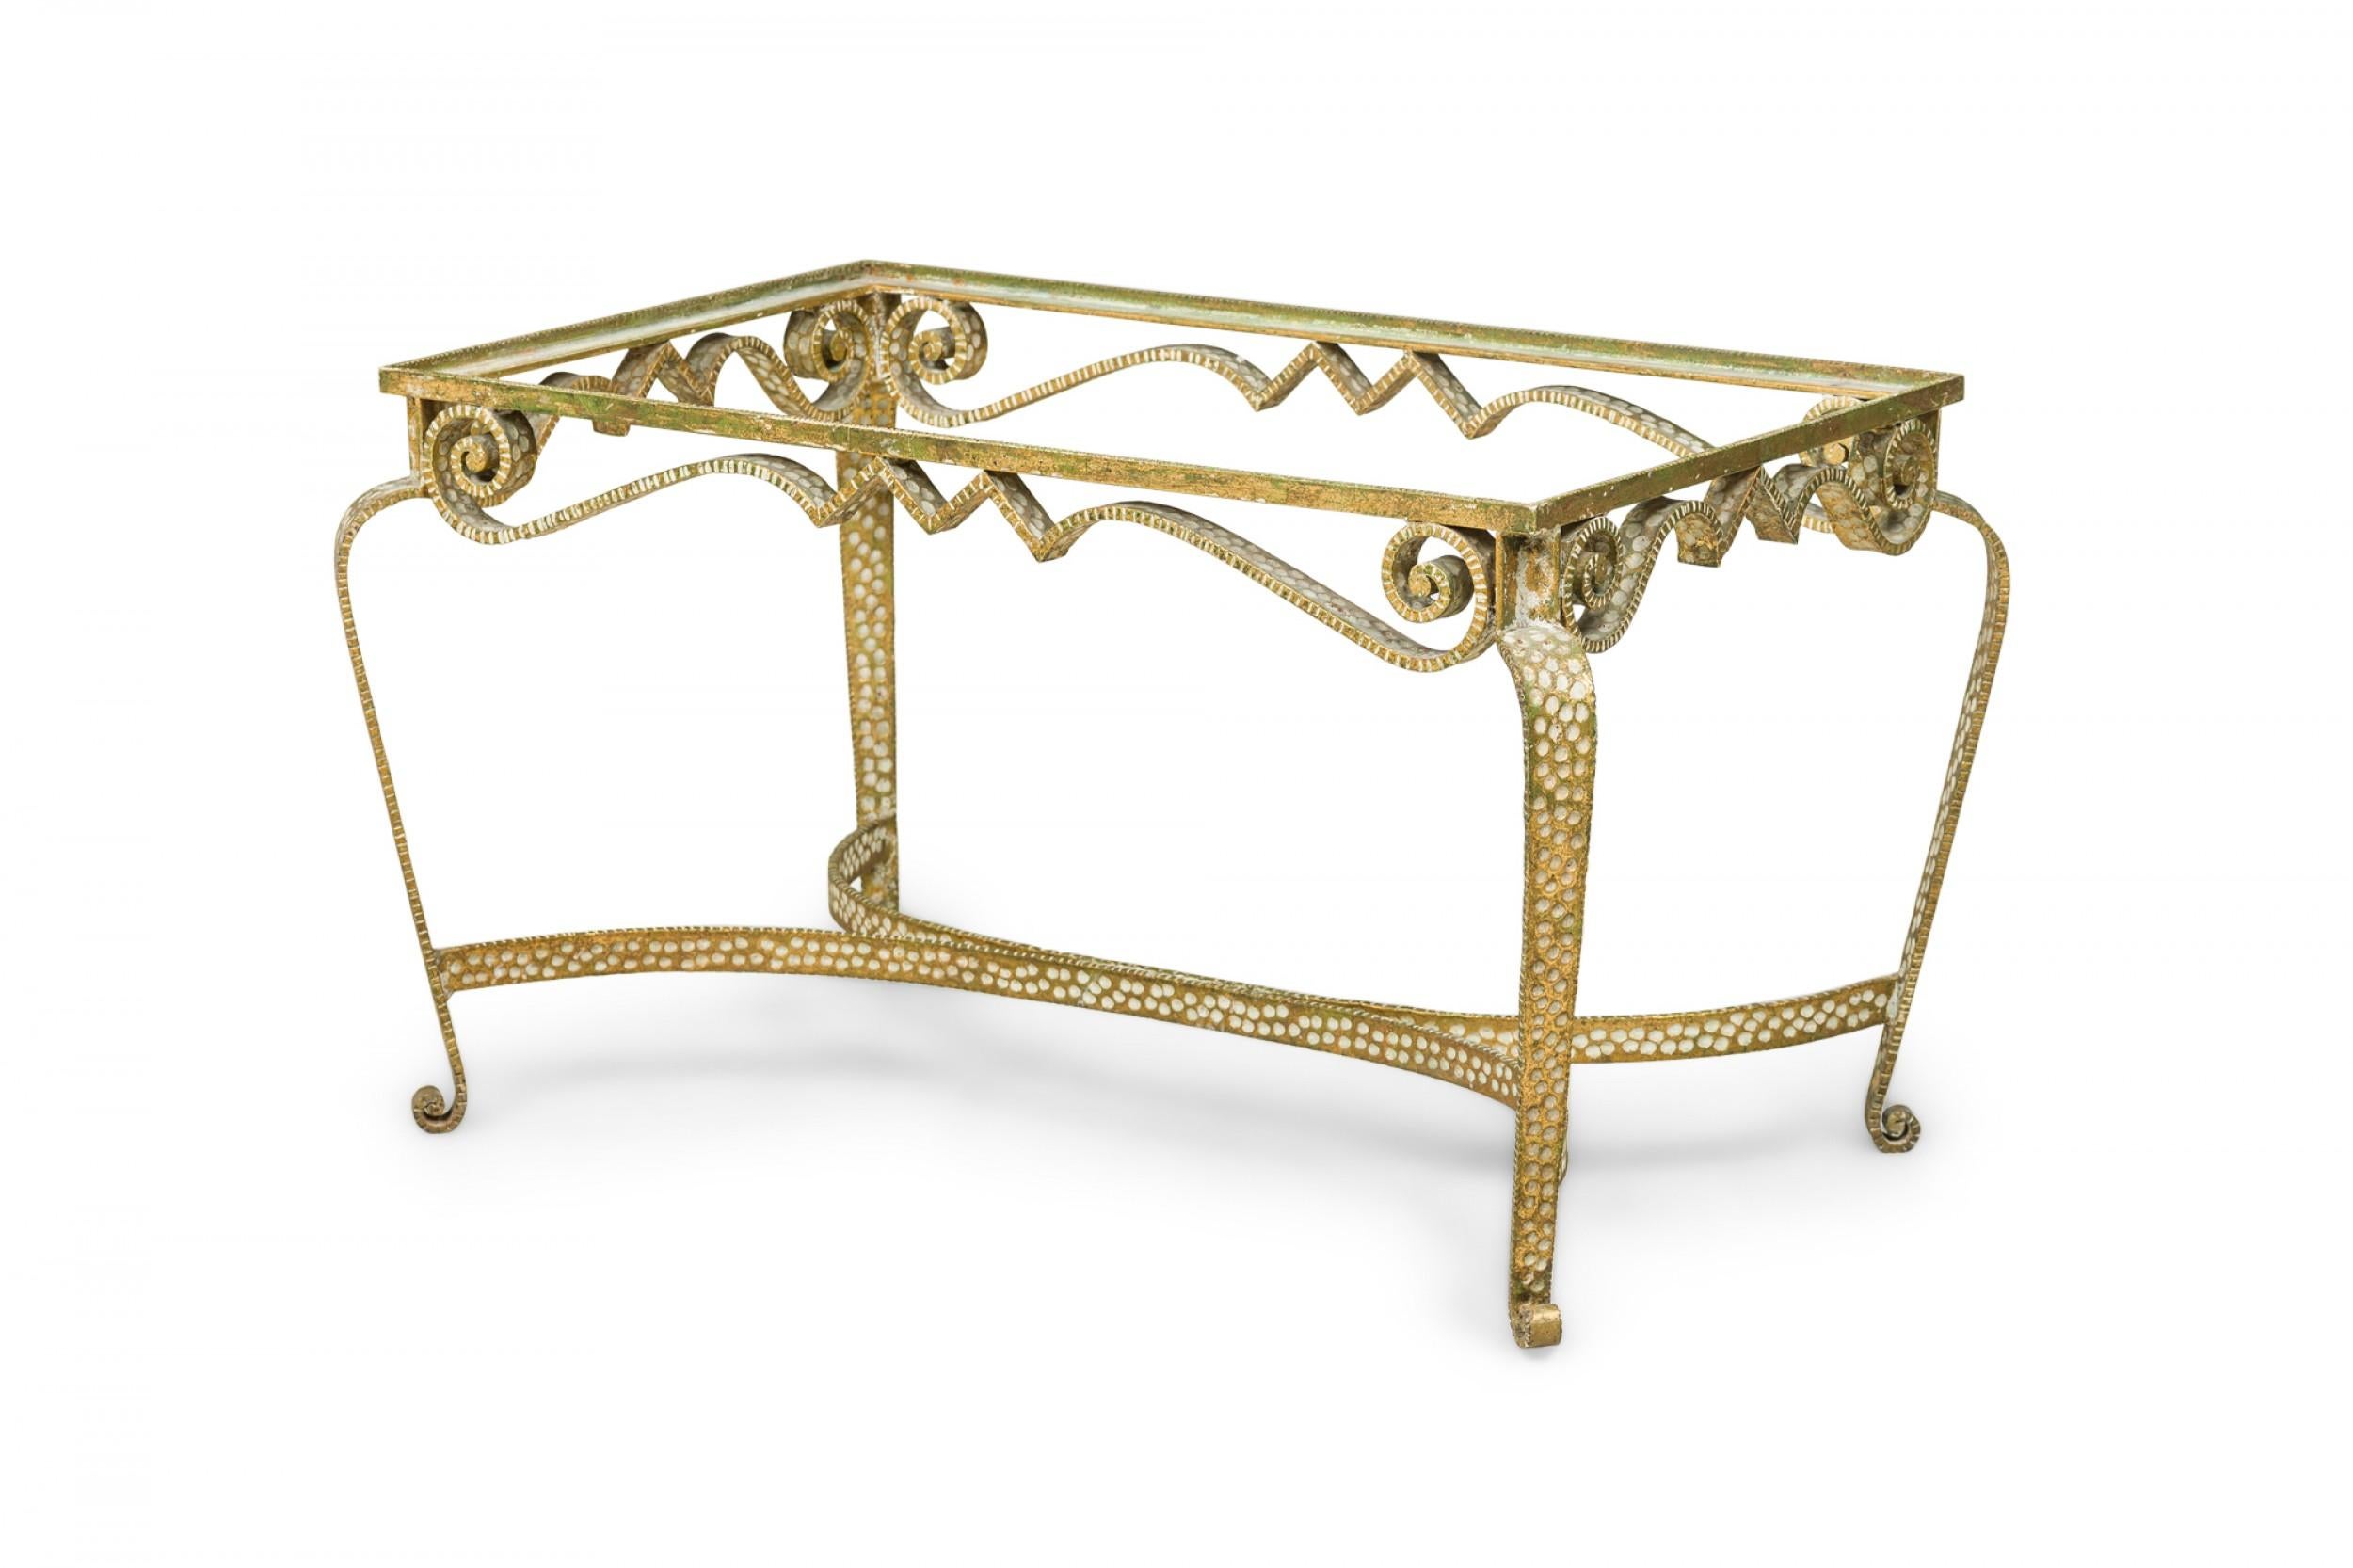 Italian Mid-Century (1950s) low / coffee table frame constructed from pebble hand-hammered gilt iron with scrollwork designs and a stretcher base (missing inset glass or marble table top). (PIER LUIGI COLLI)
 

 Condition Notes:
 Wear to finish,